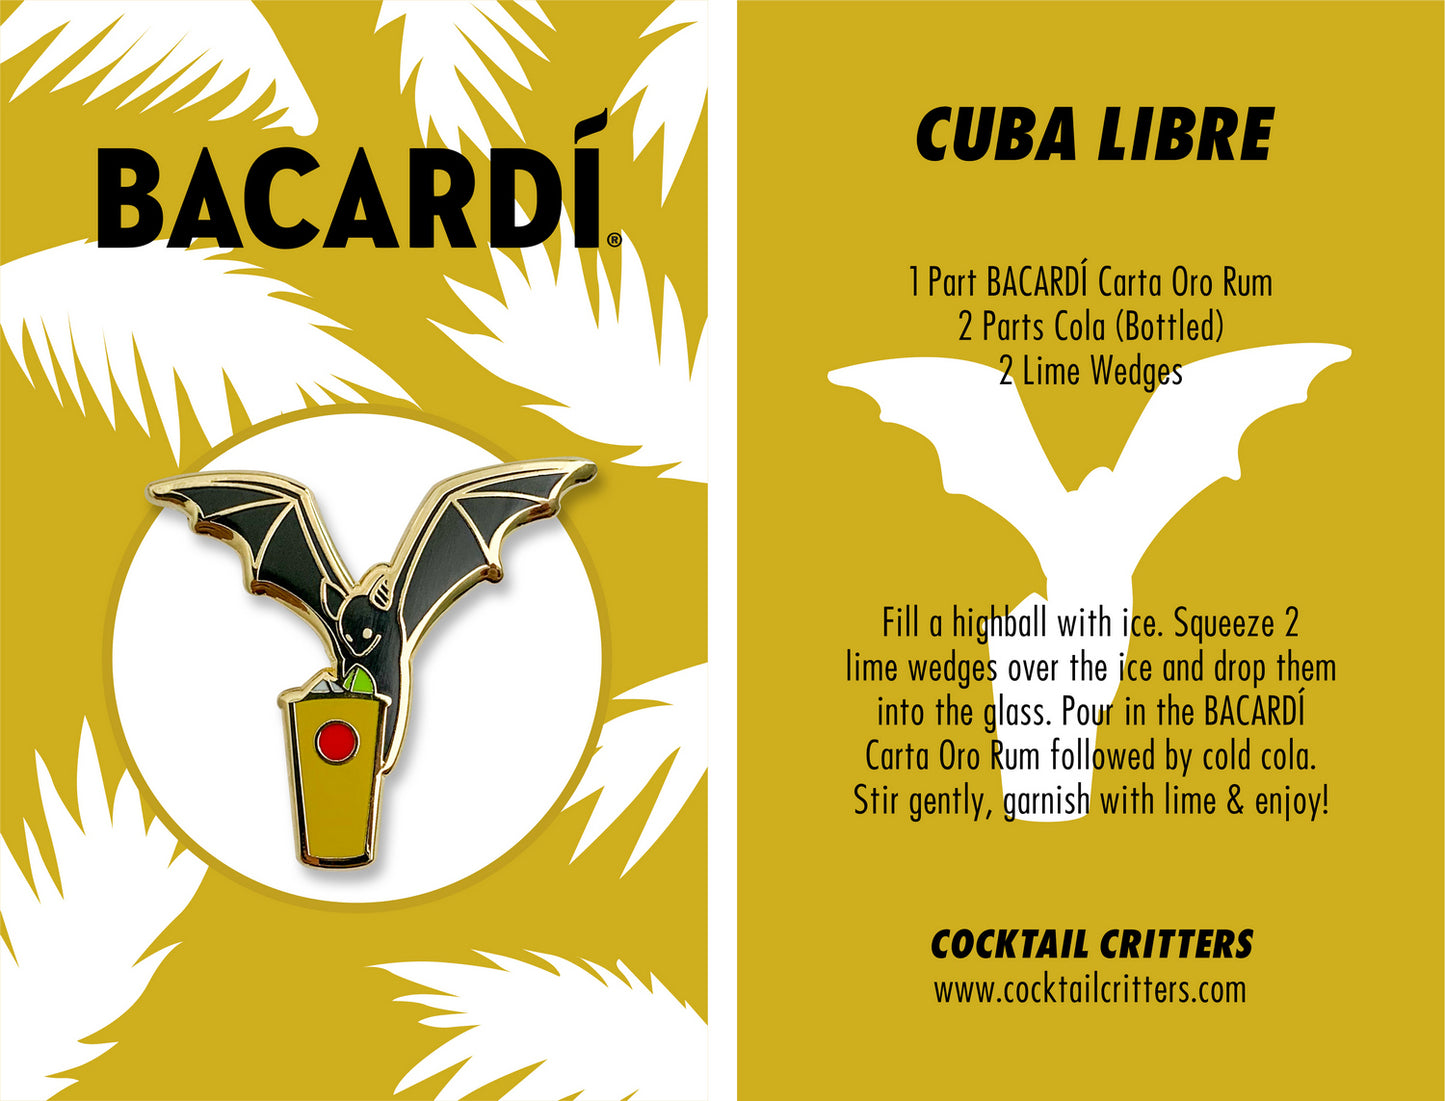 Bacardi Cuba Libre Cocktail Enamel Pin by Cocktail Critters